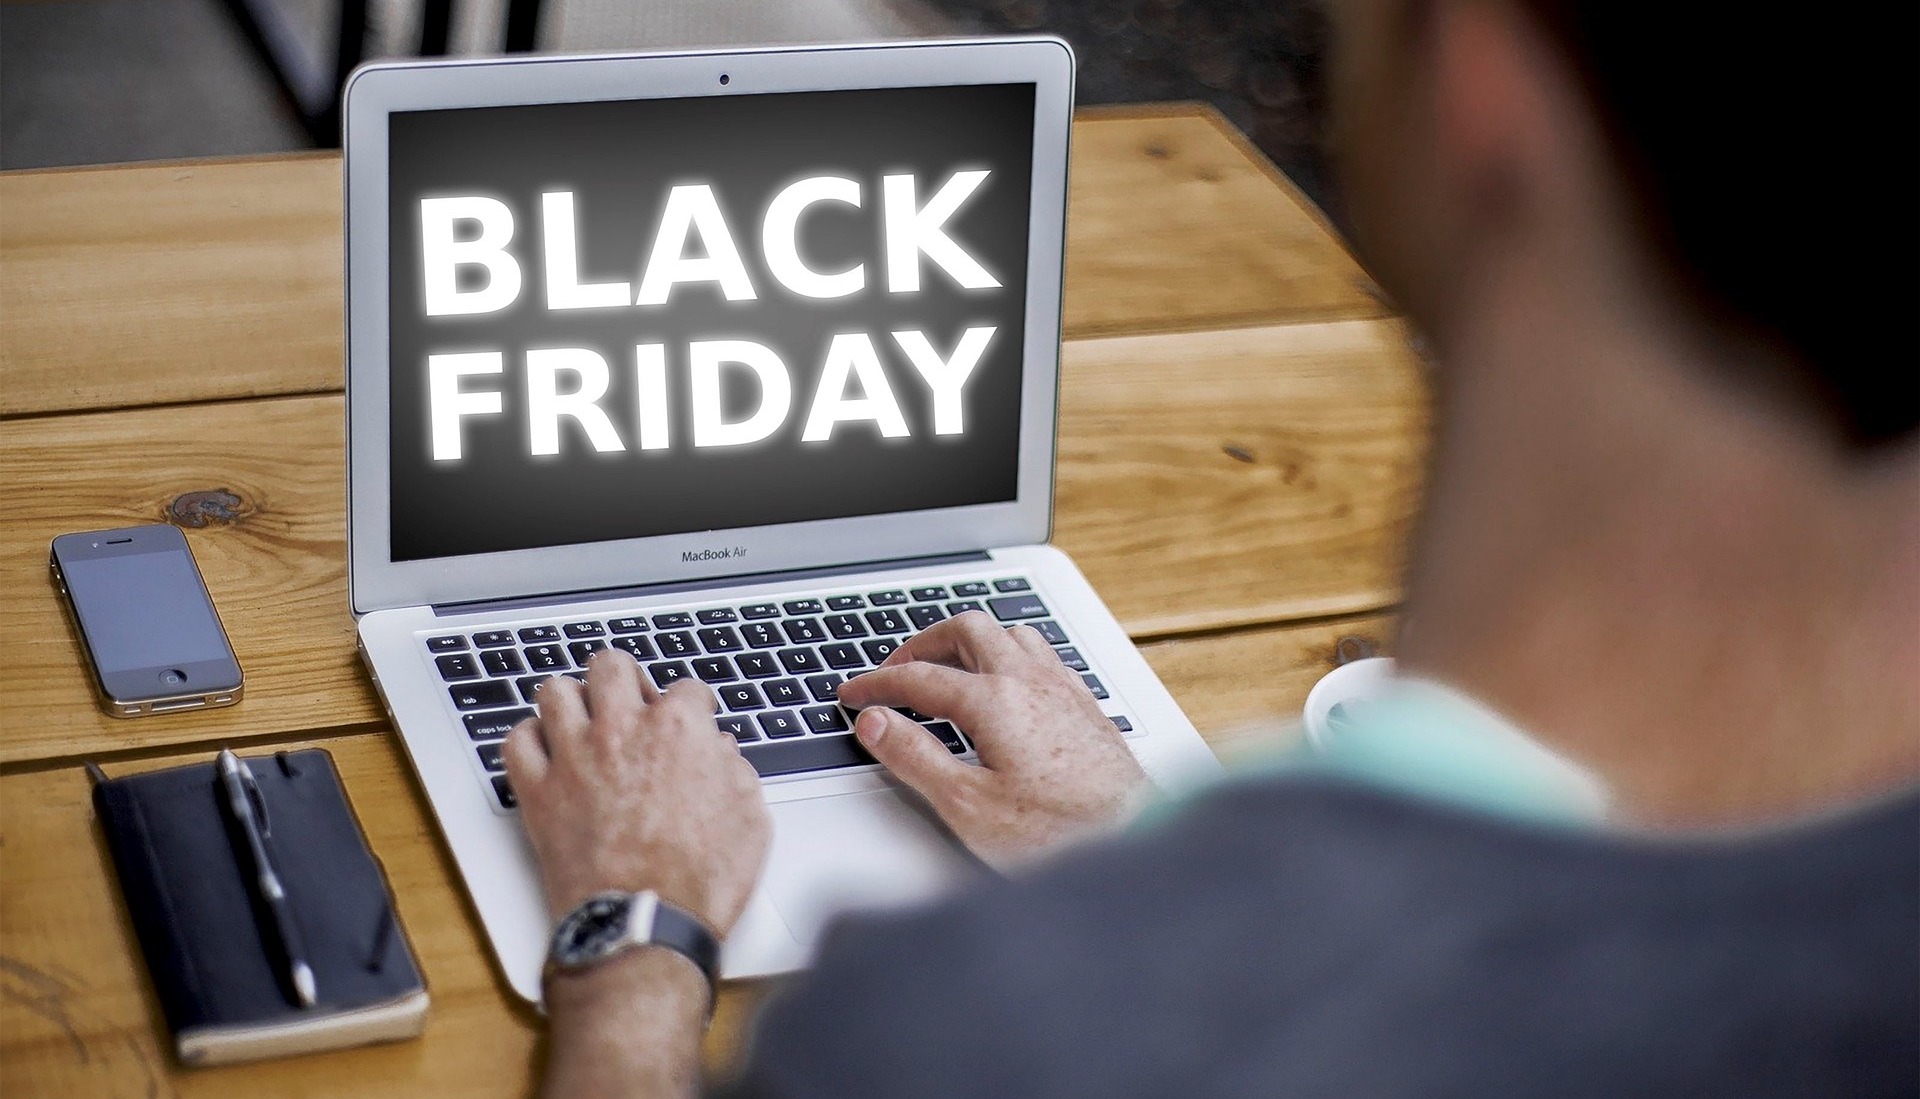 The 7 Top Strategies for Last-Minute Black Friday Marketing